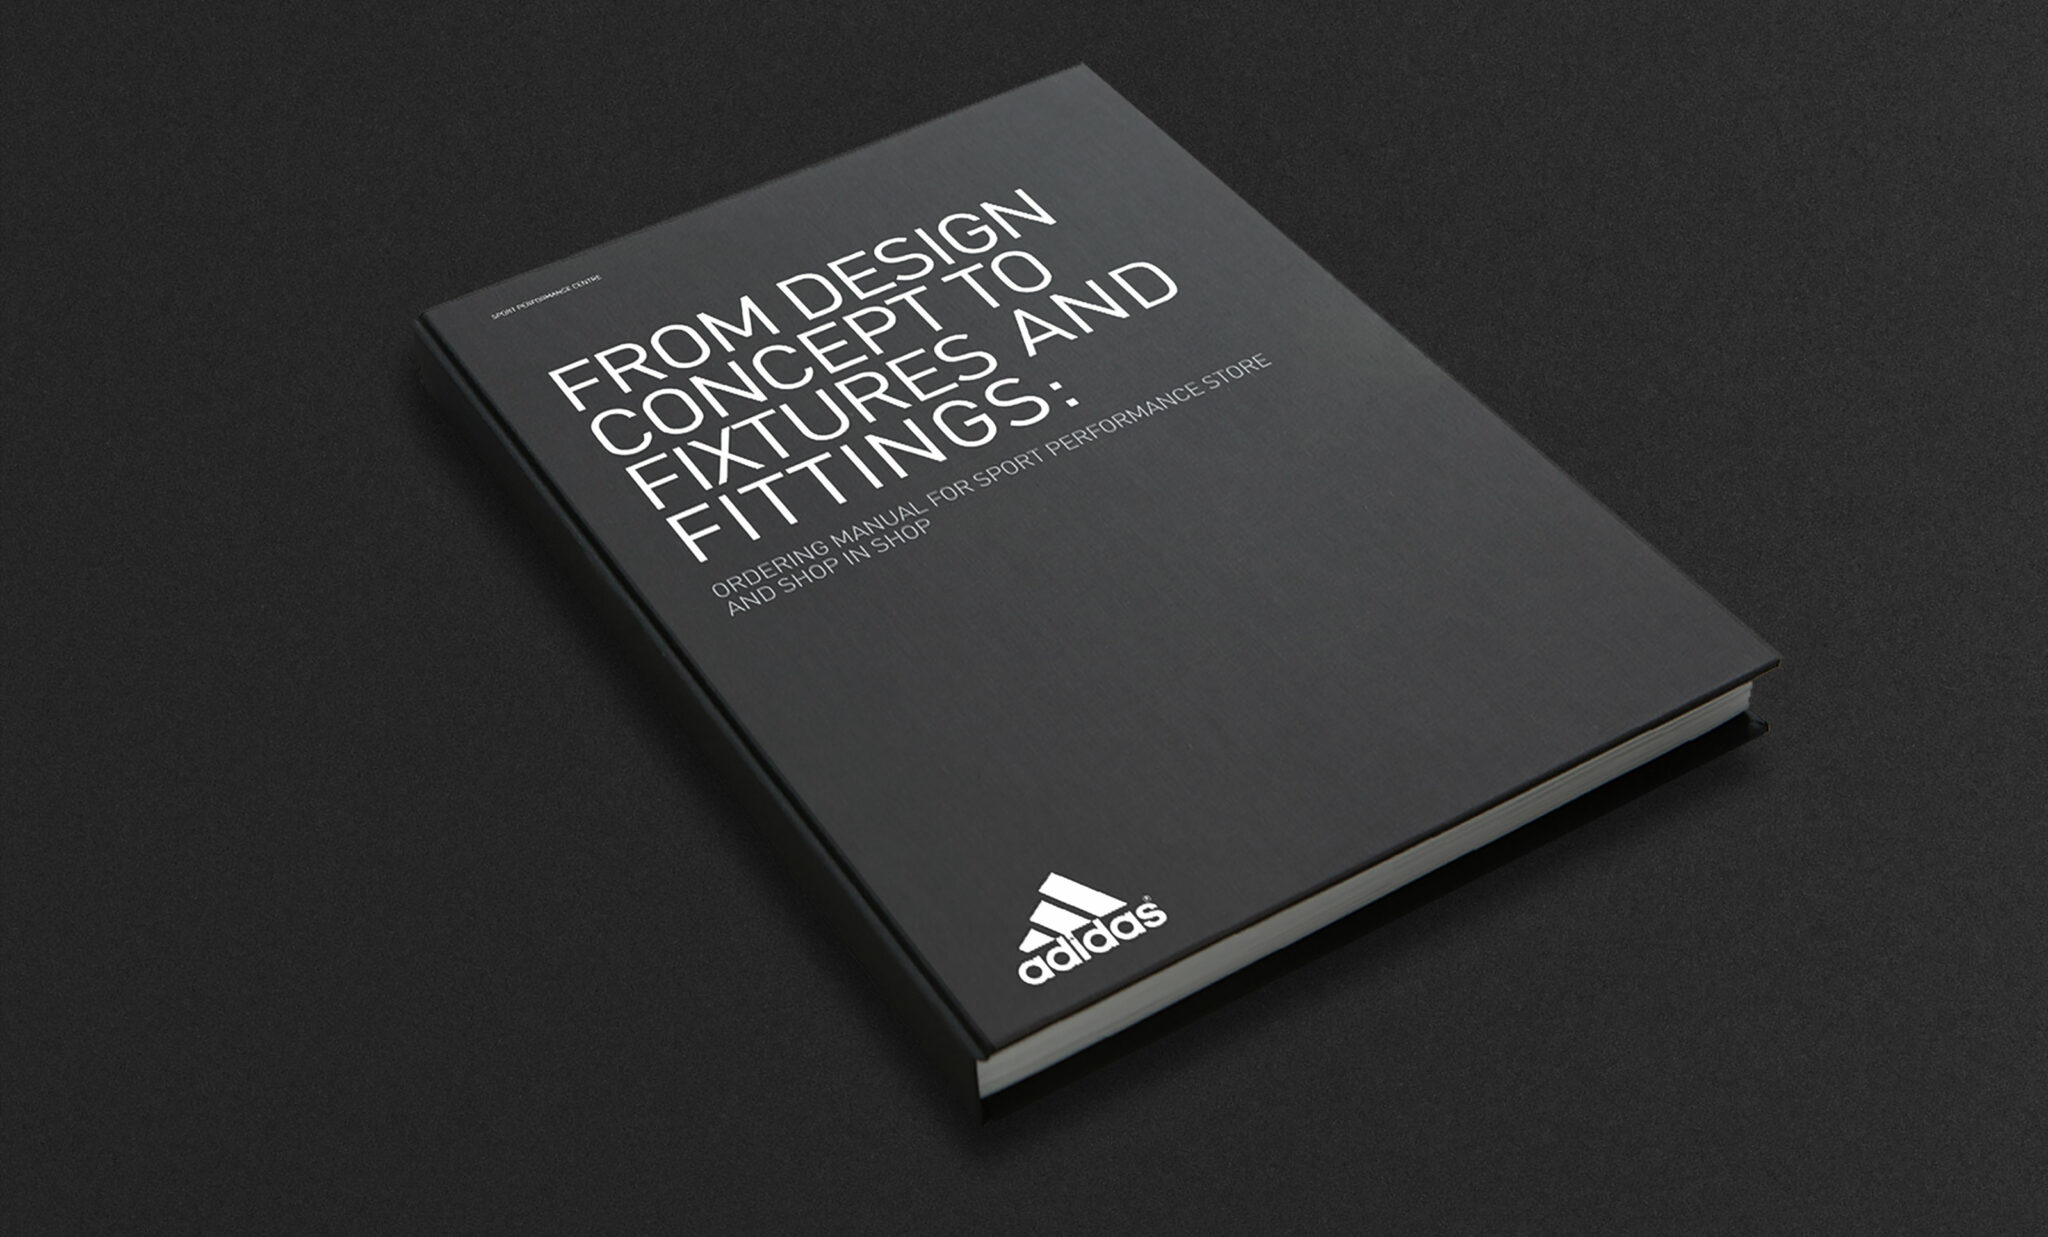 Adidas Fixture and Fittings Manual